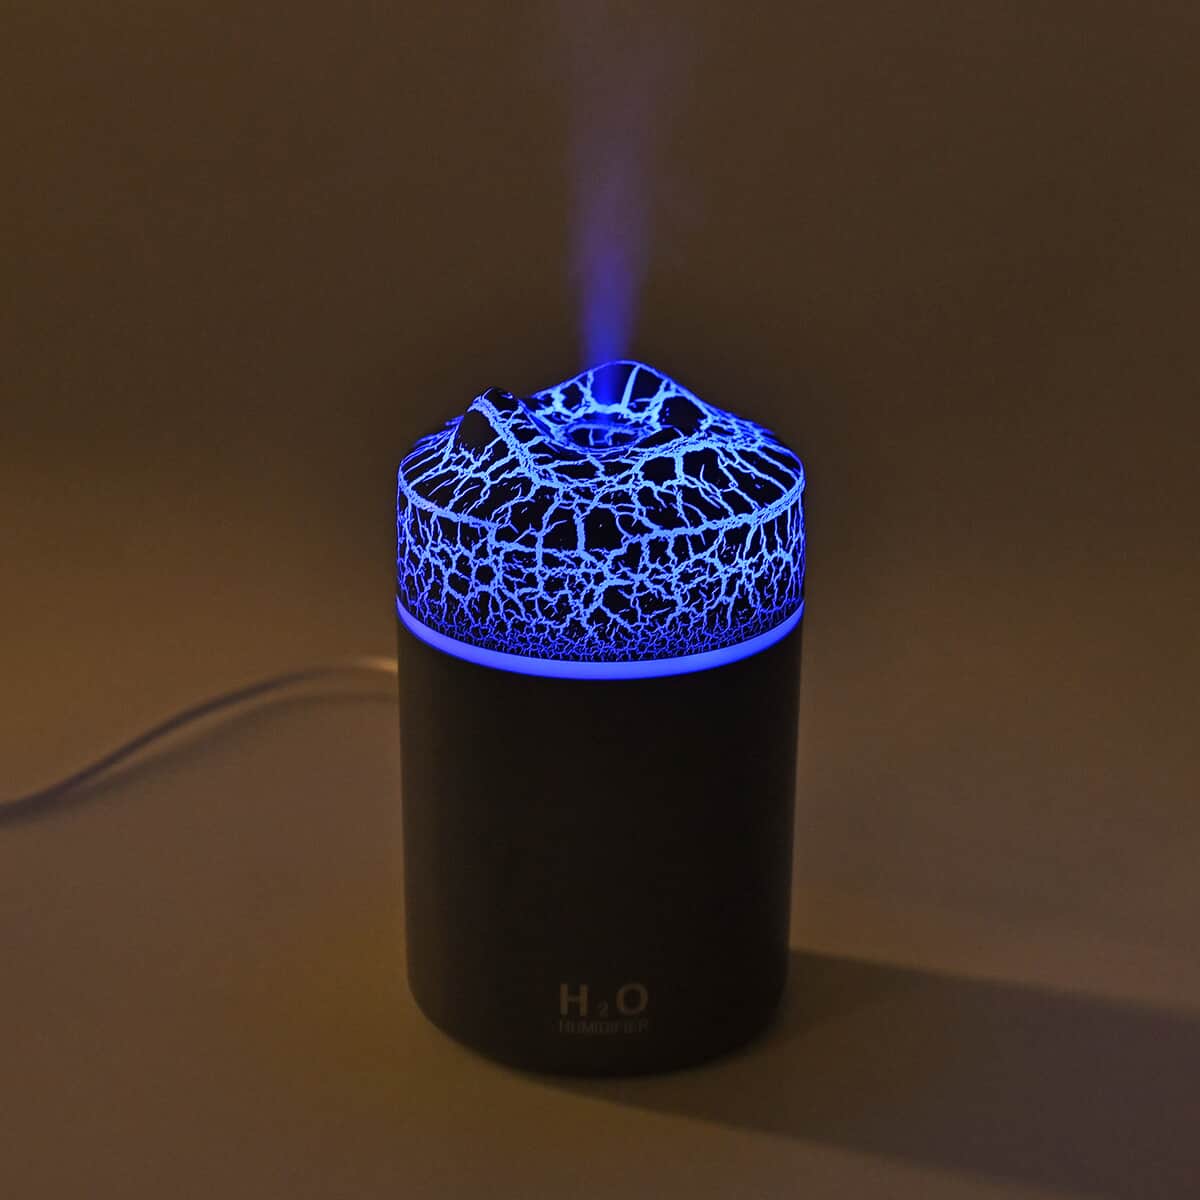 Colorful Light Changing Portable Air Humidifier (3.07"x3.07"x5.12") Power 2w & Capacity 300ml image number 1